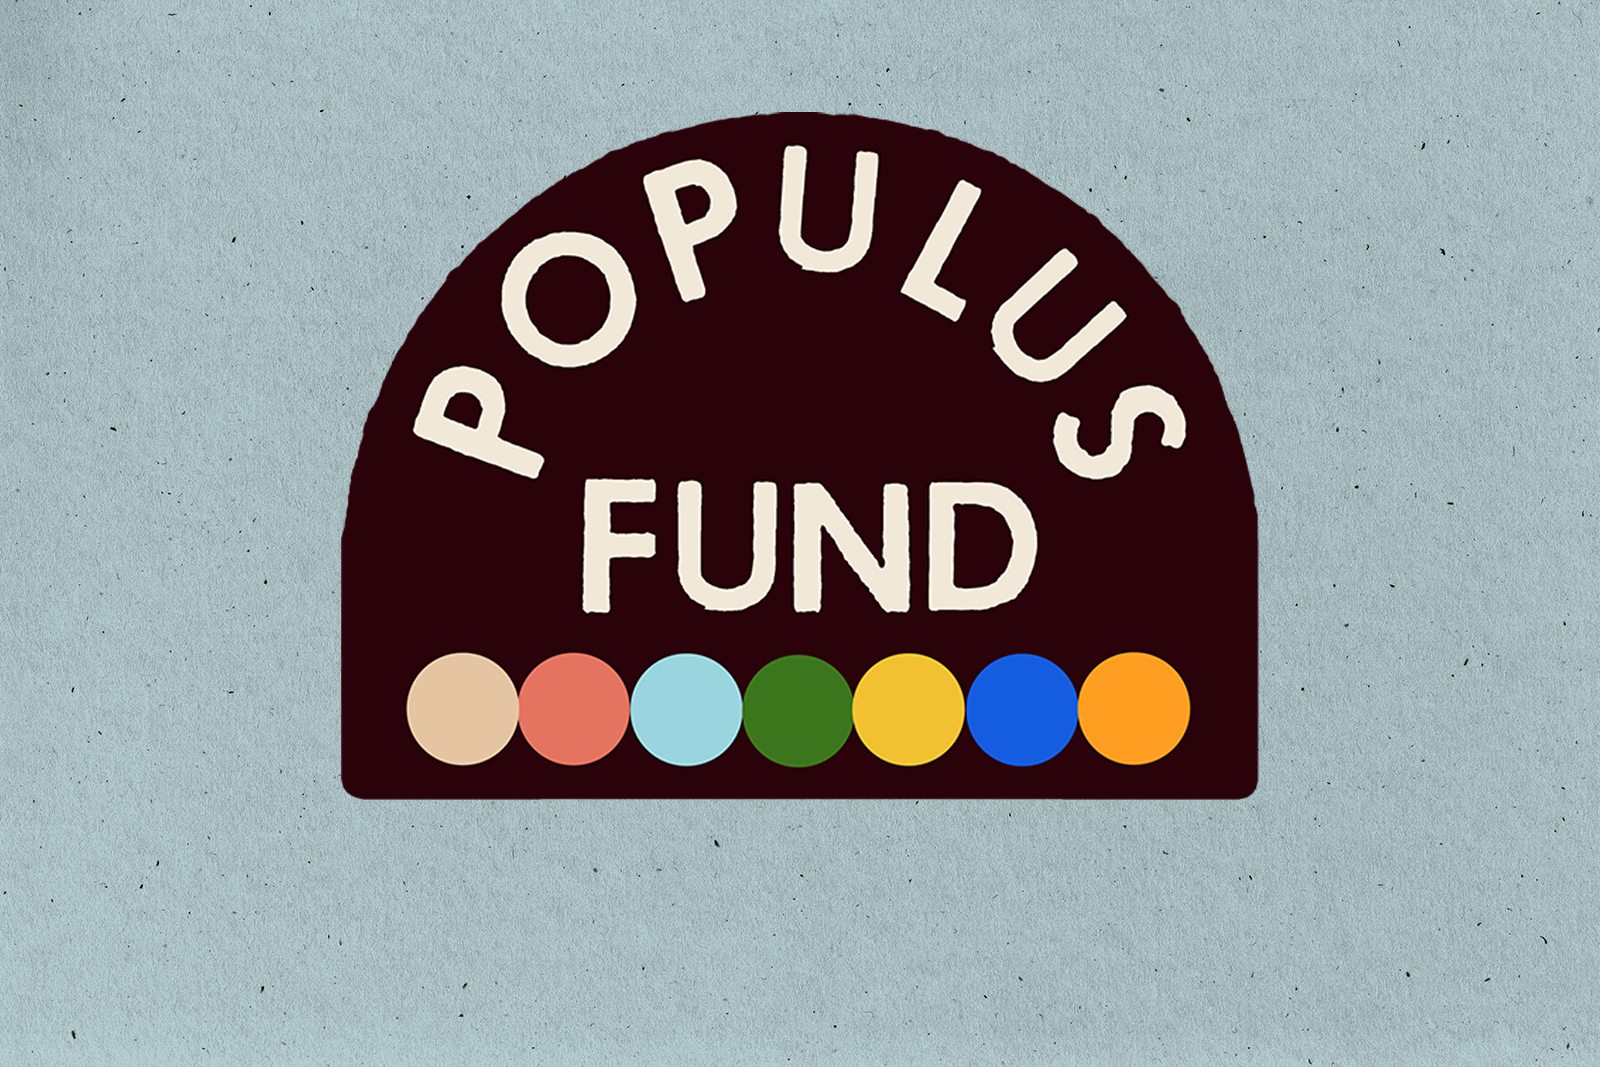 Happenings Size 2024 Populus Fund Logo on a blue paper background